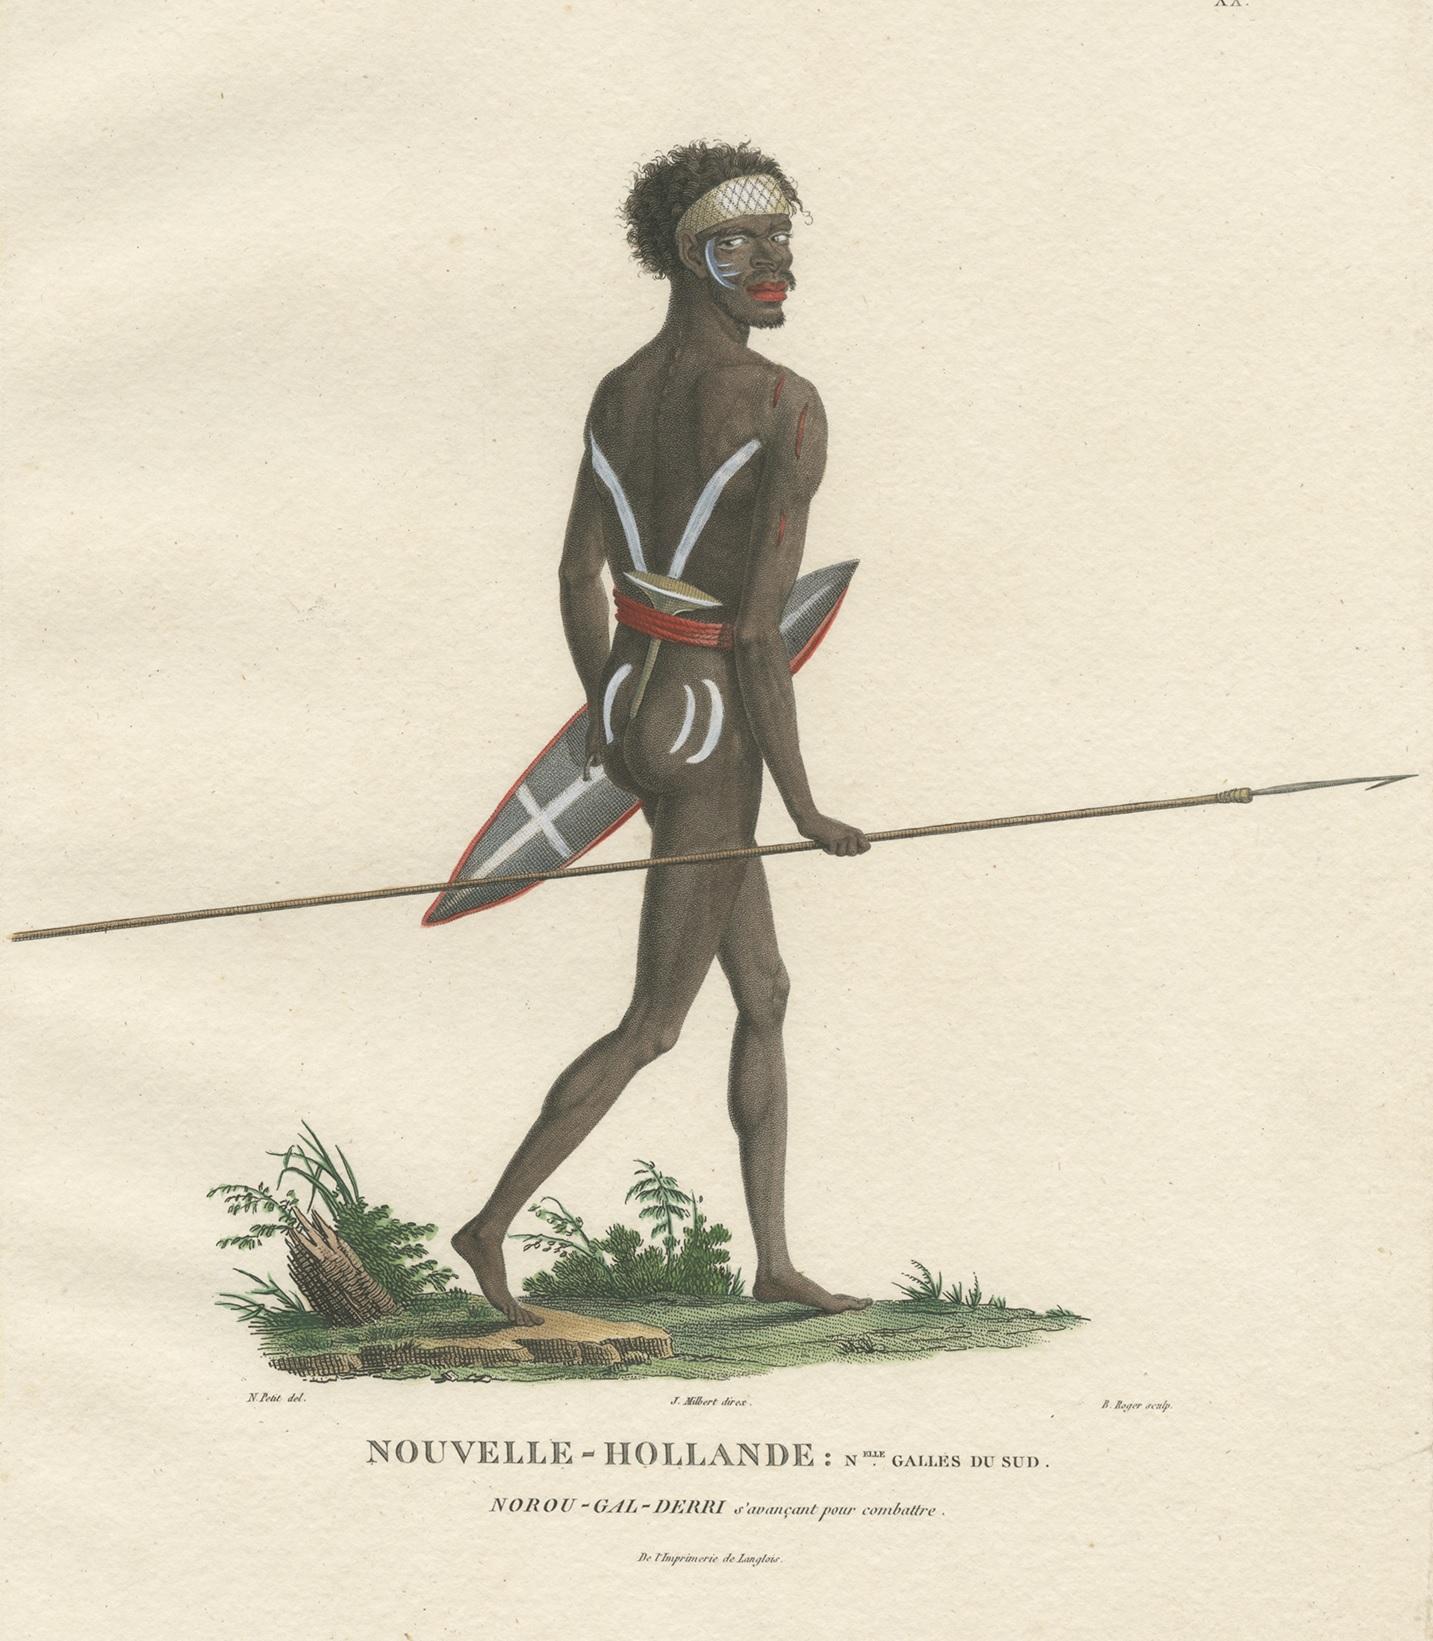 19th Century Antique Hand-Colored Print of an Indigenous Australian Man by Peron 'circa 1810' For Sale